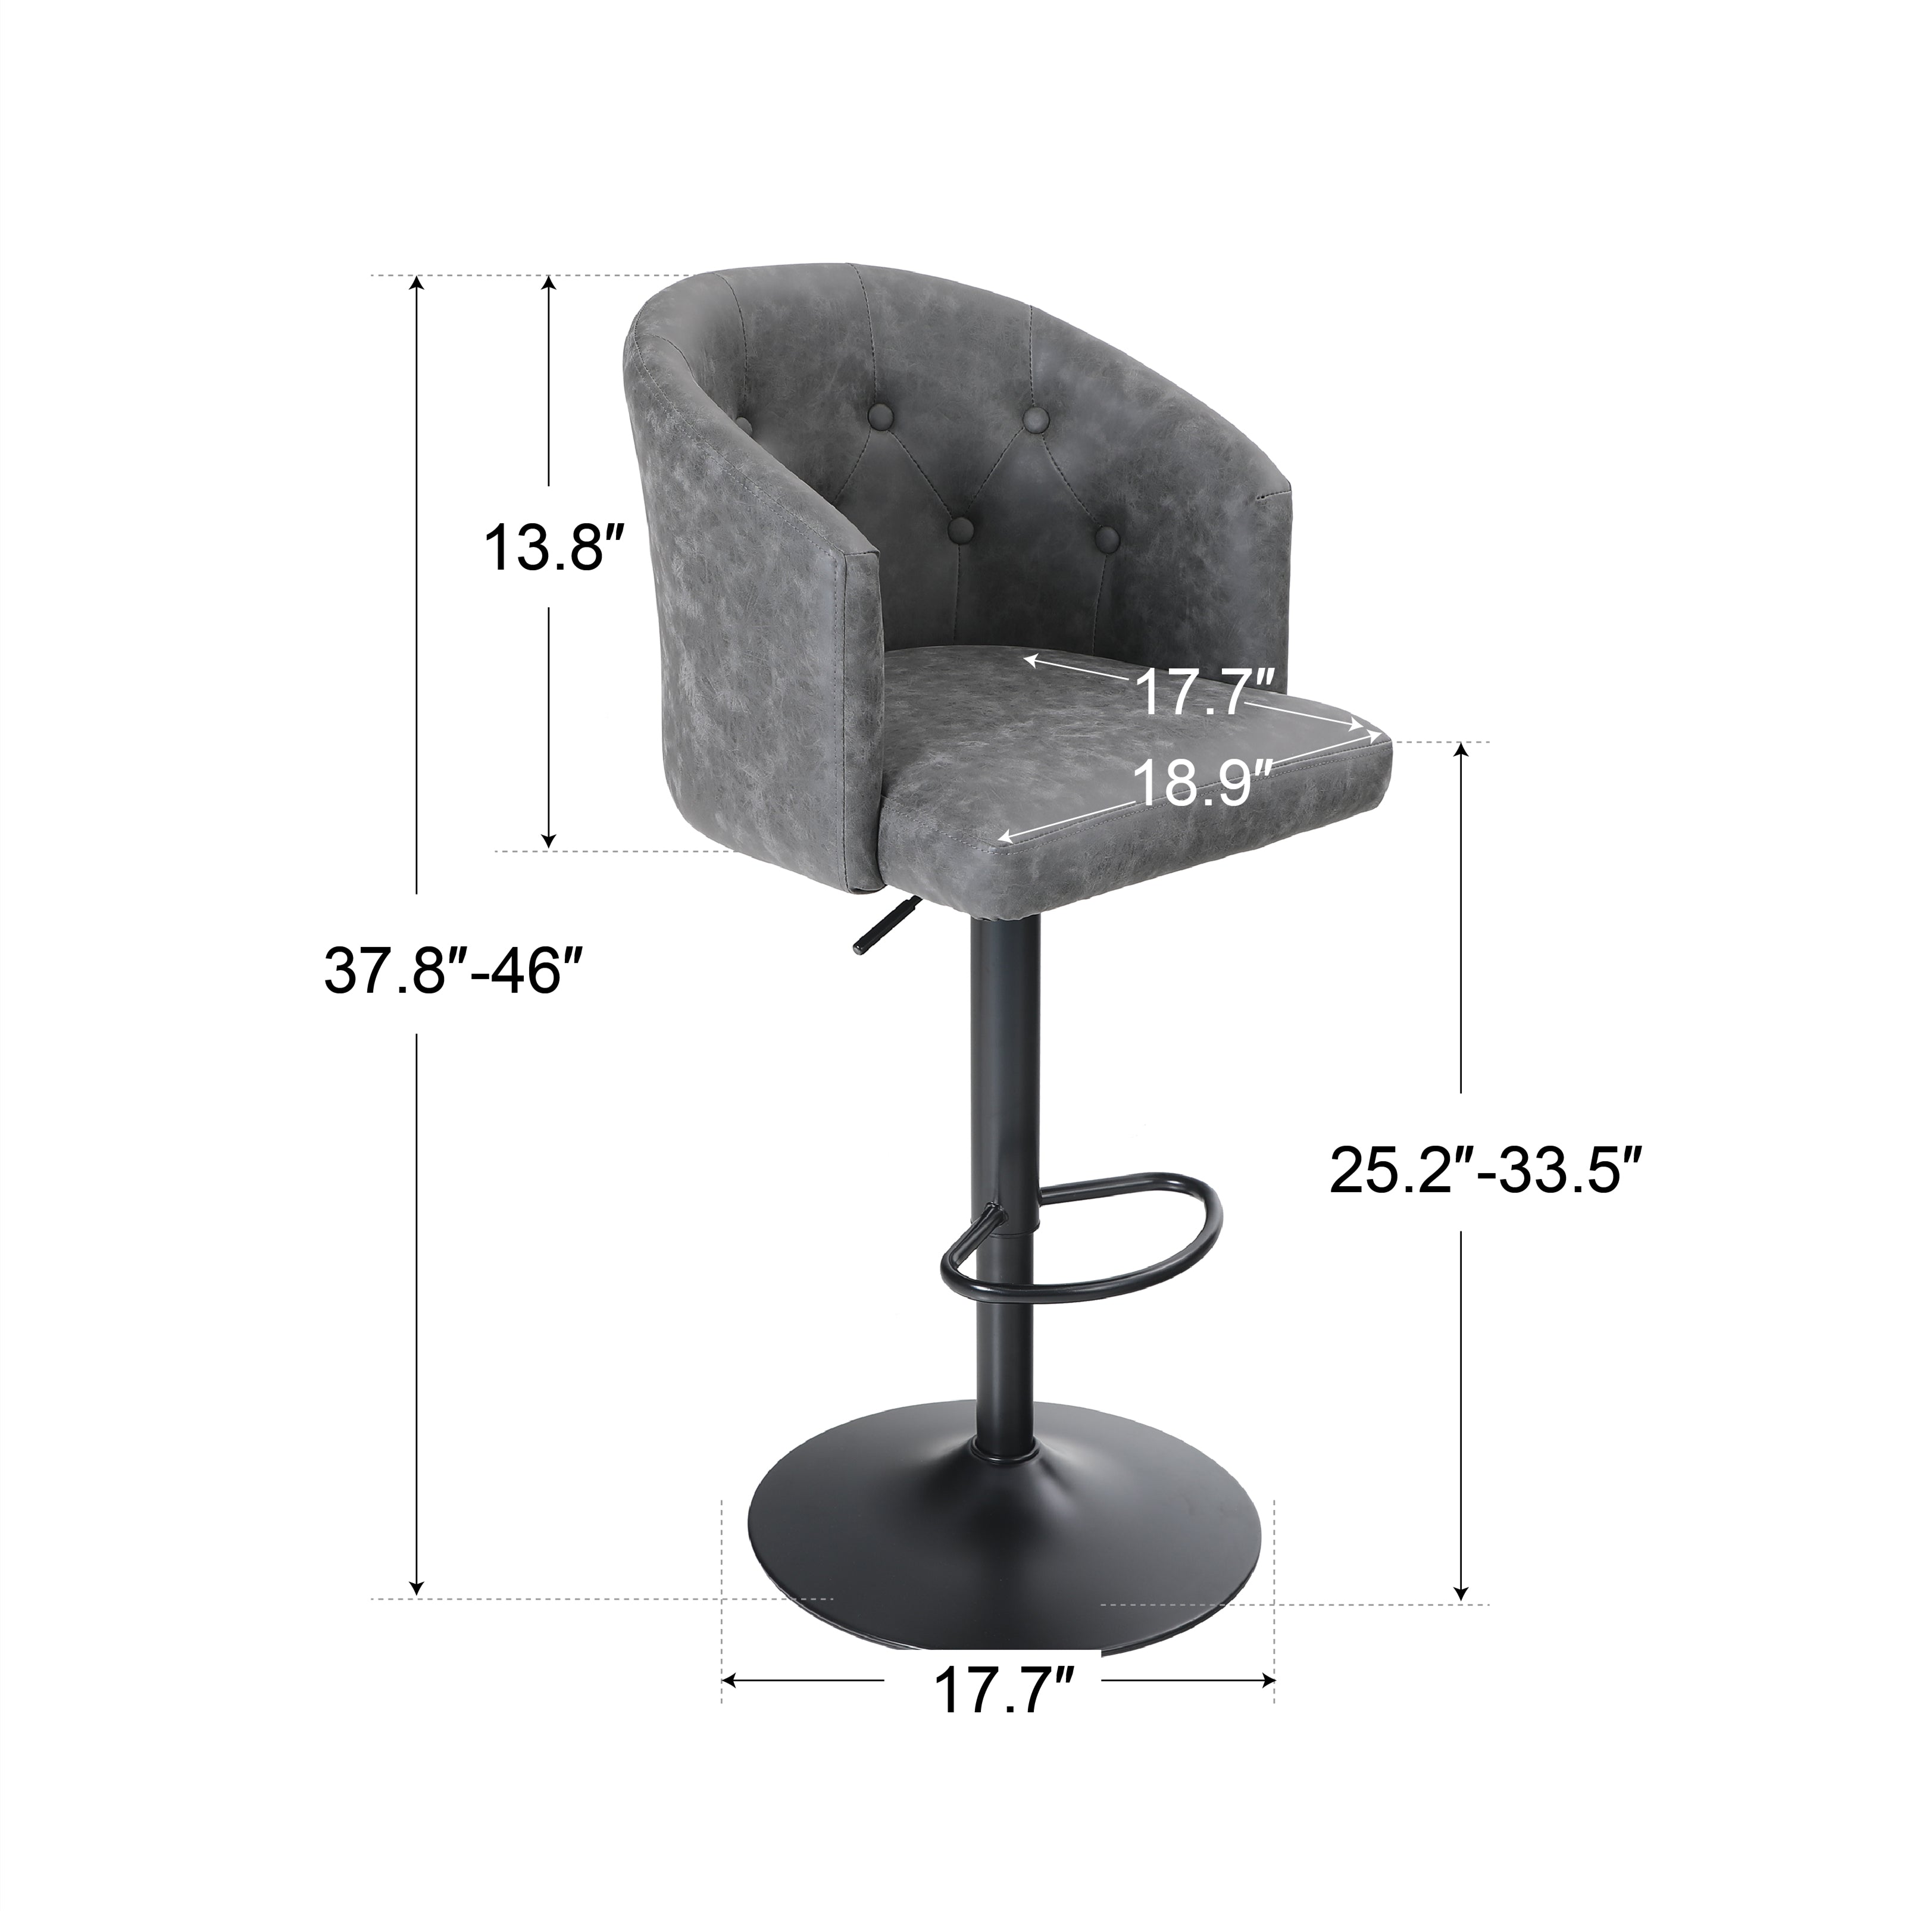 PHI VILLA Adjustable PU Leather Swivel Bar Stool with Backrest and Armrest, Seat Height 25"-33"